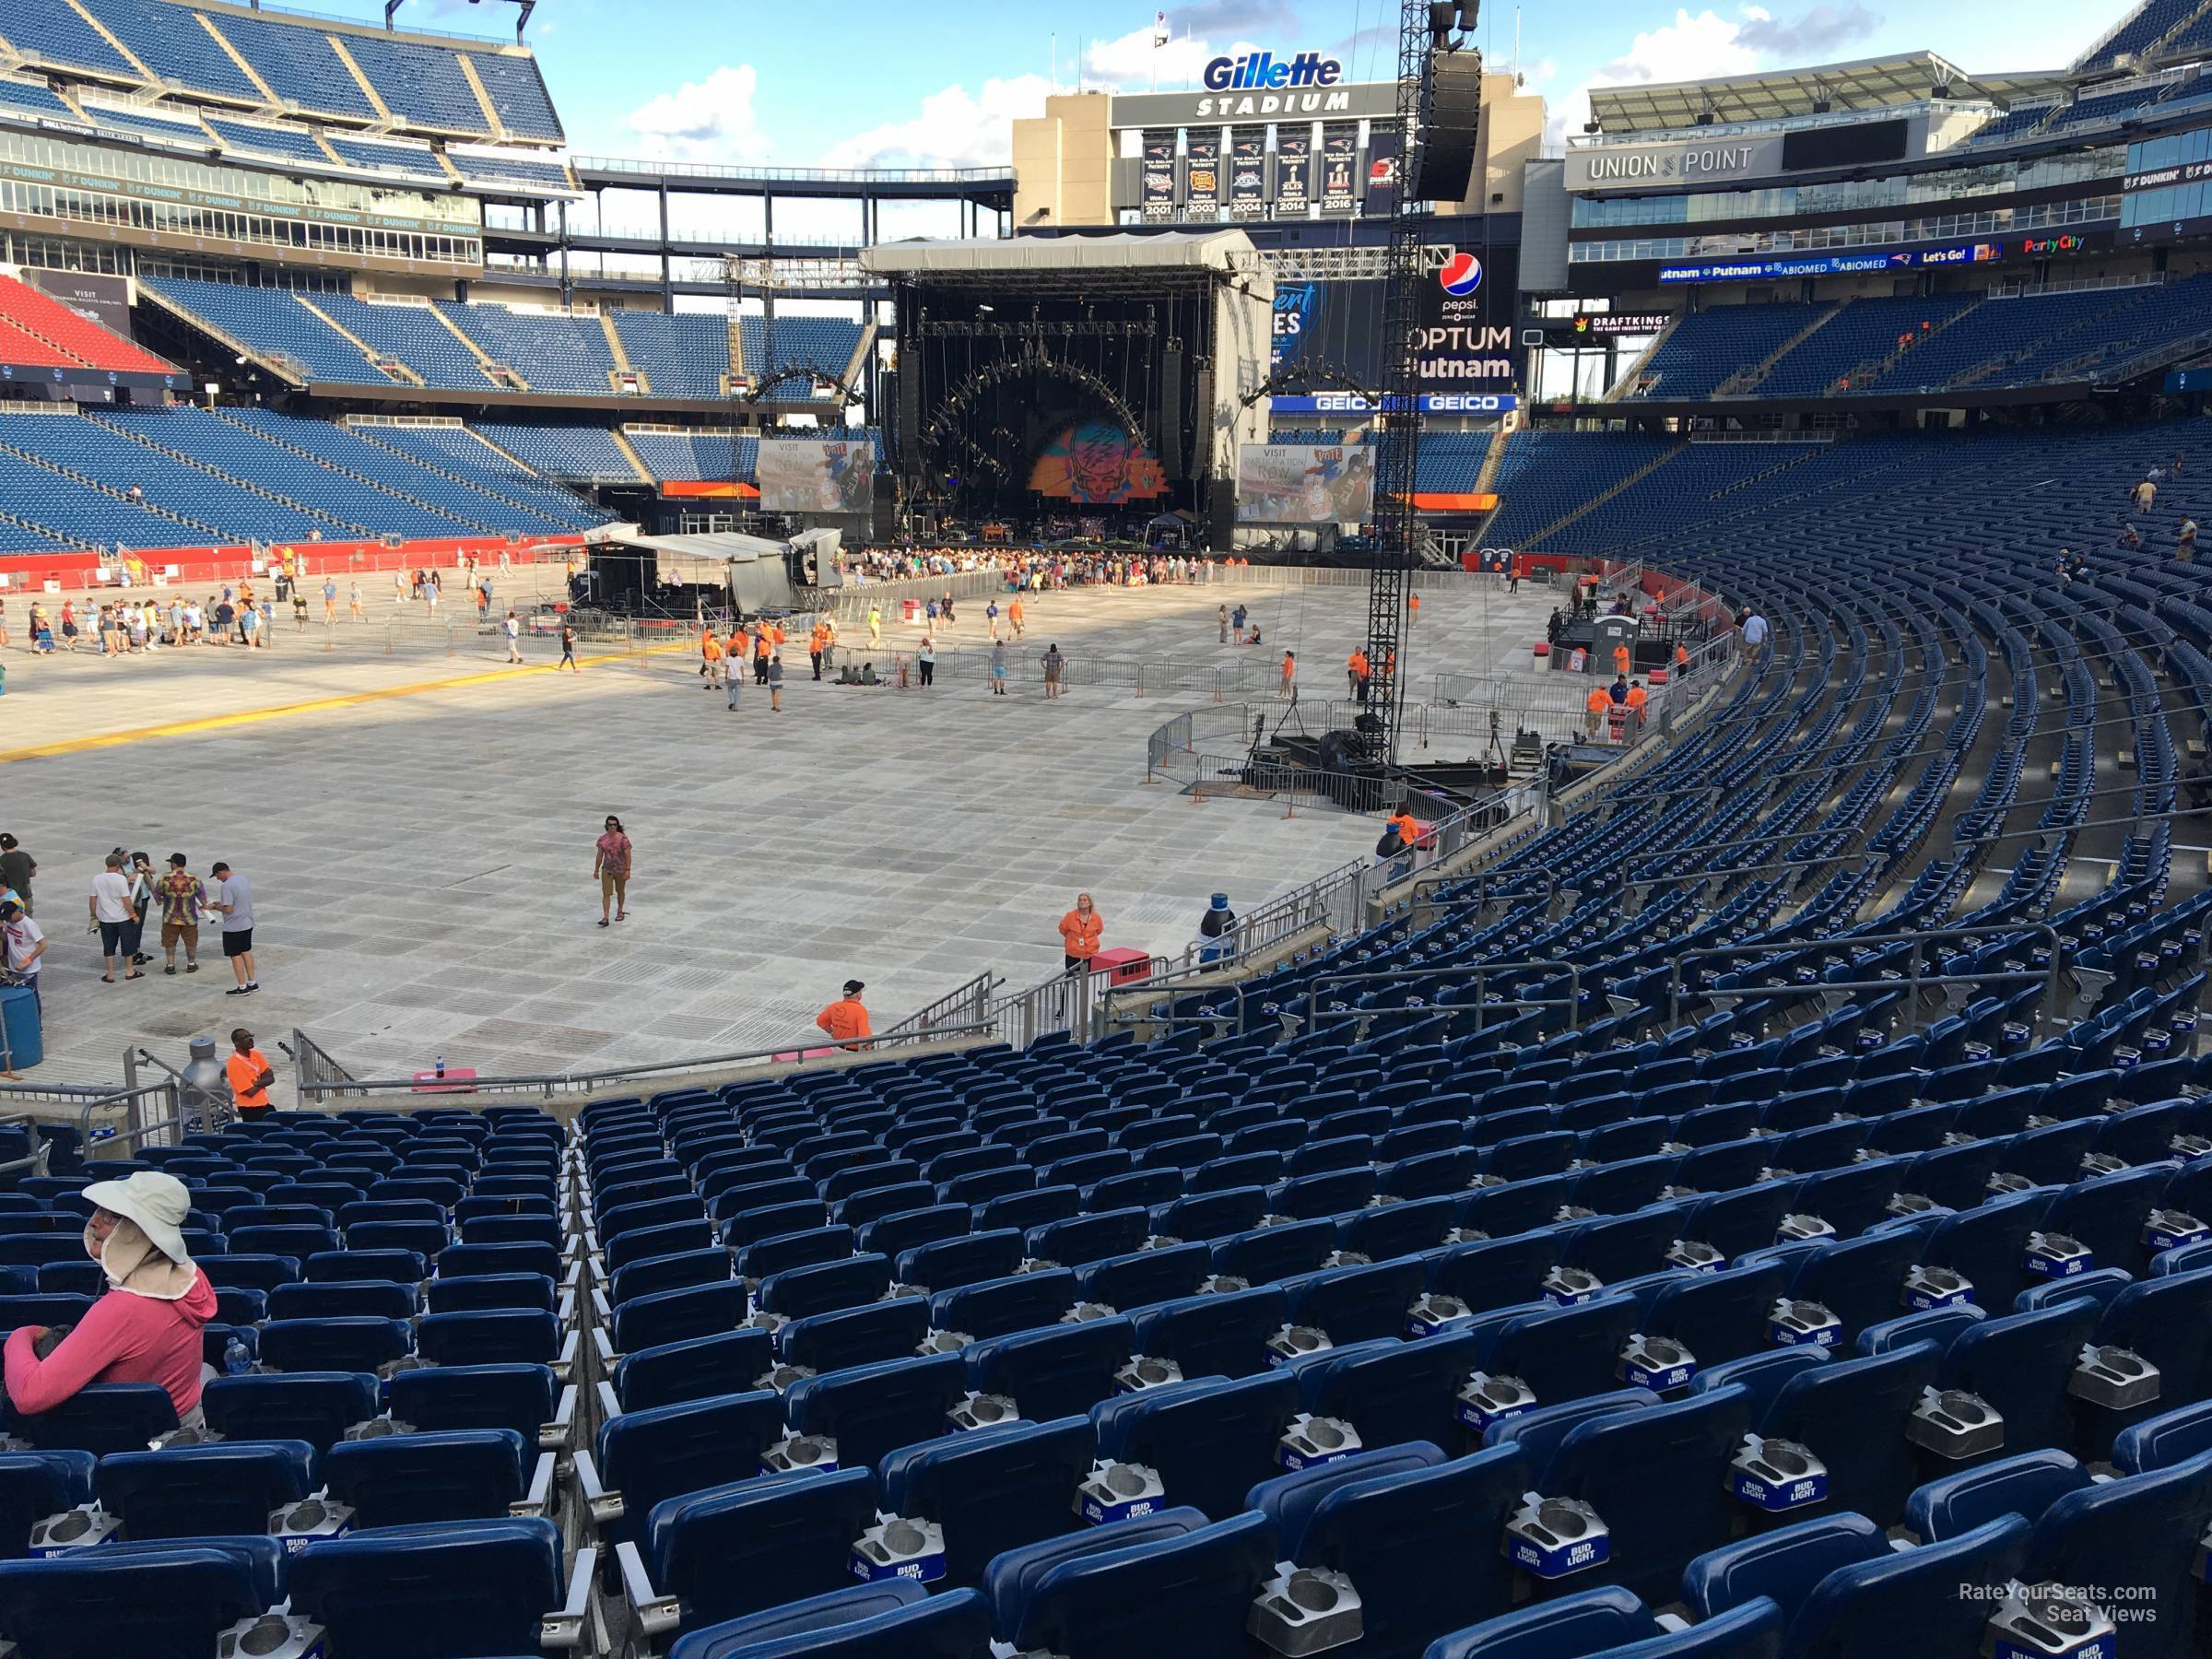 Gillette Stadium Section 139 Concert Seating - RateYourSeats.com